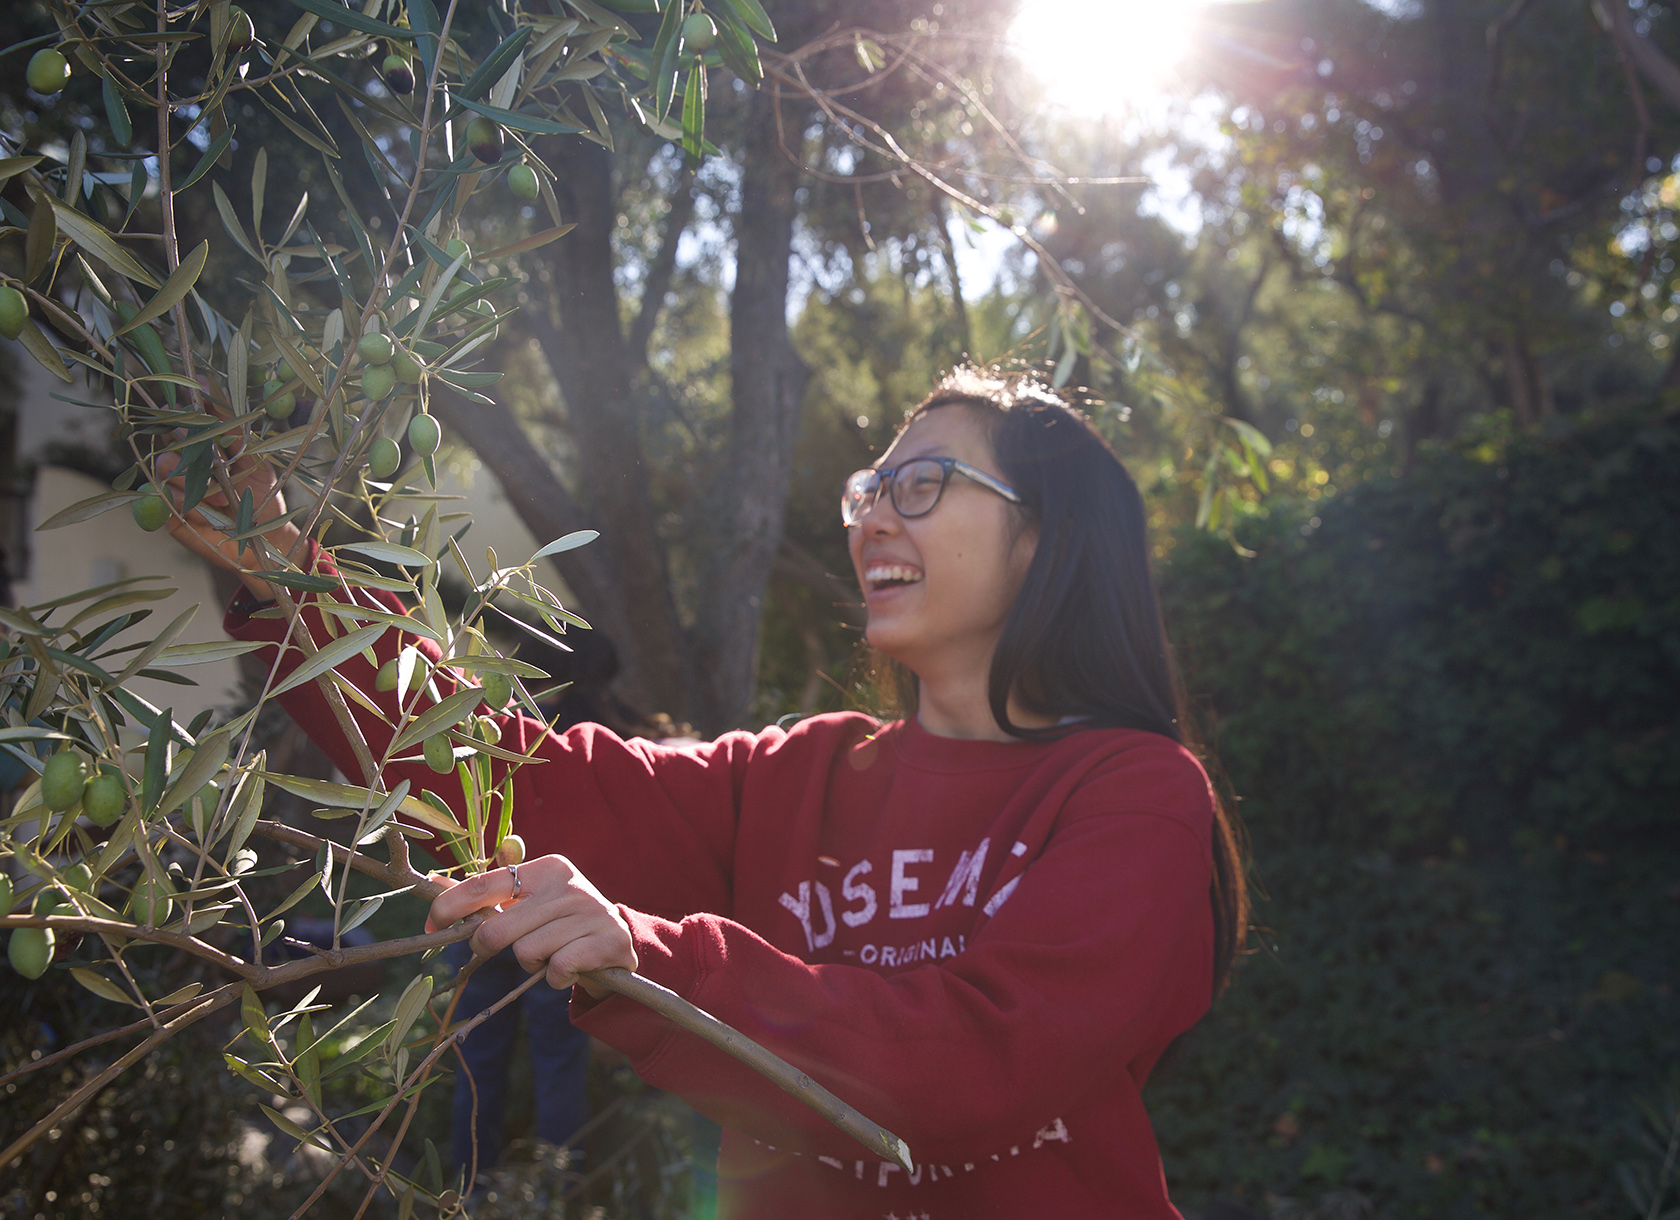 A young woman smiling while picking olives from an olive tree.